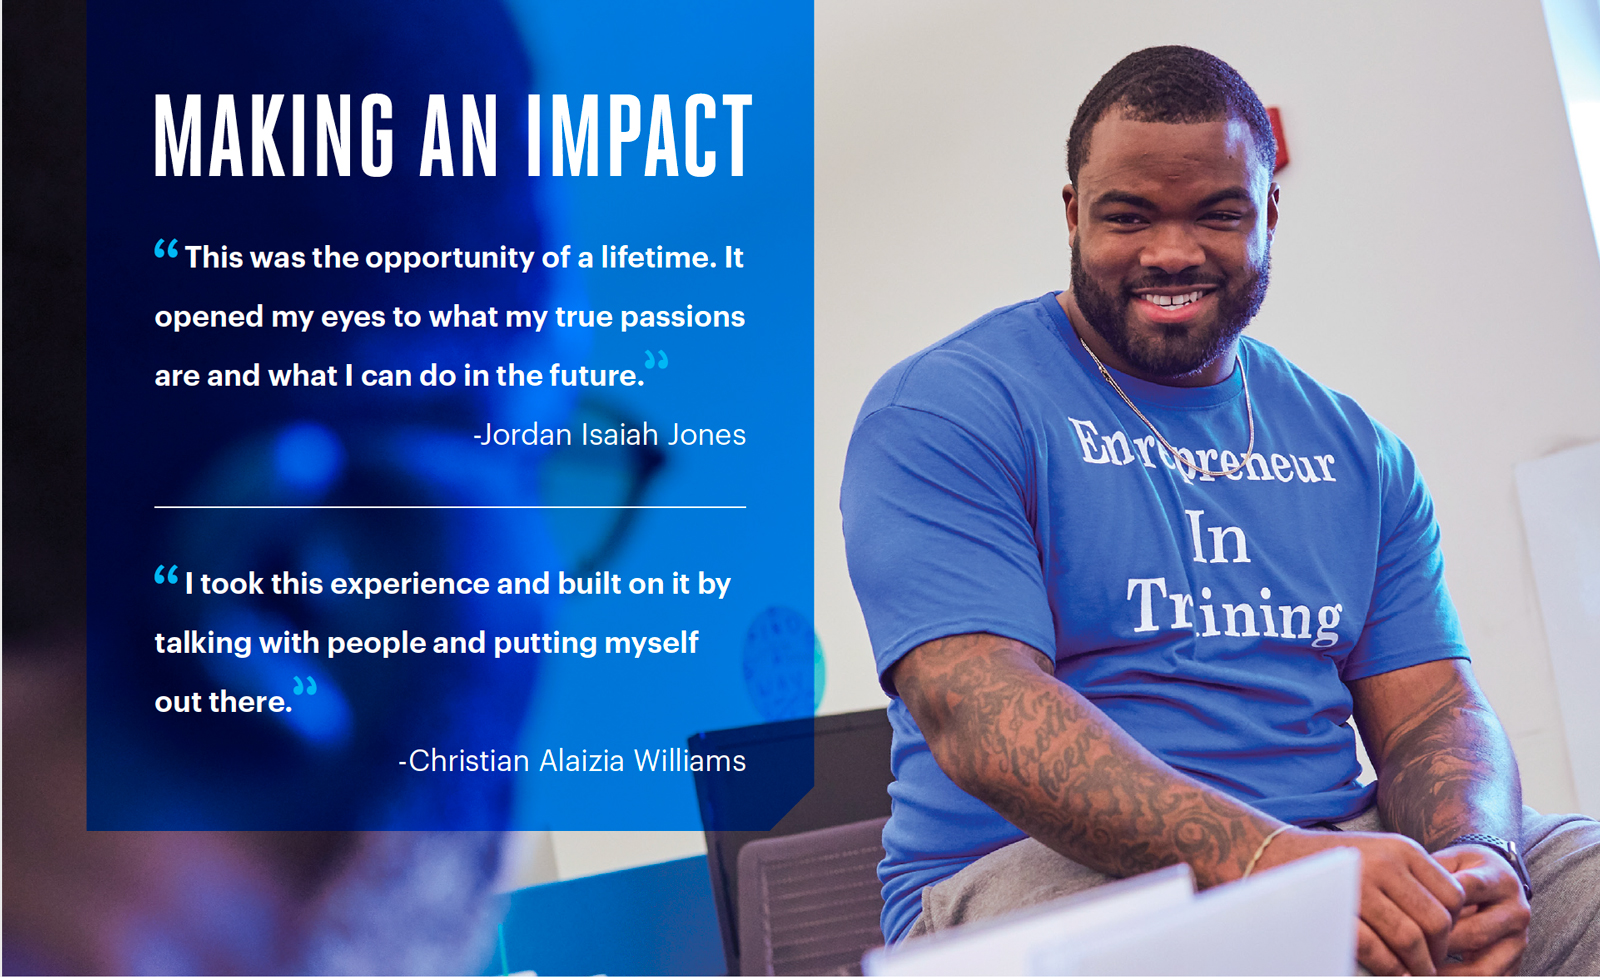 MAKING AN IMPACT | "This was the opportunity of a lifetime. It opened my eyes to what my true passions are and what I can do in the future." - Jordan Isaiah Jones | "I took this experience and built on it by talking with people and putting myself out there." - Christian Alaiza Williams {Photo of Poe in a shirt saying "Entrepreneur In Training"}